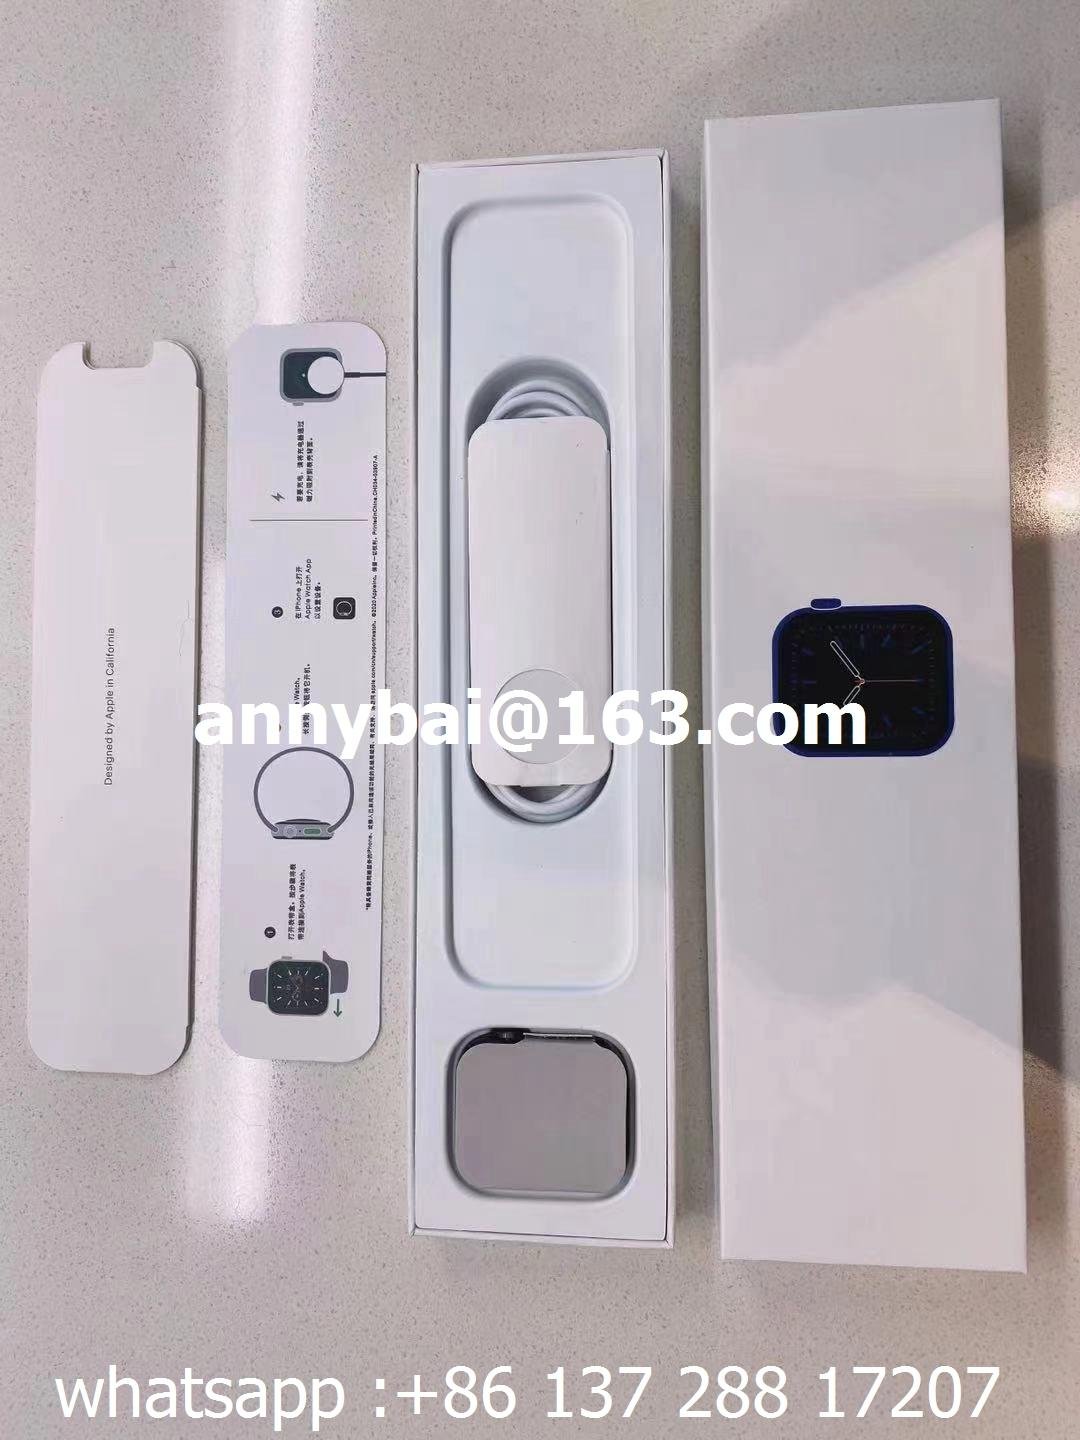 Hot selling New product Apple6 smart watch 